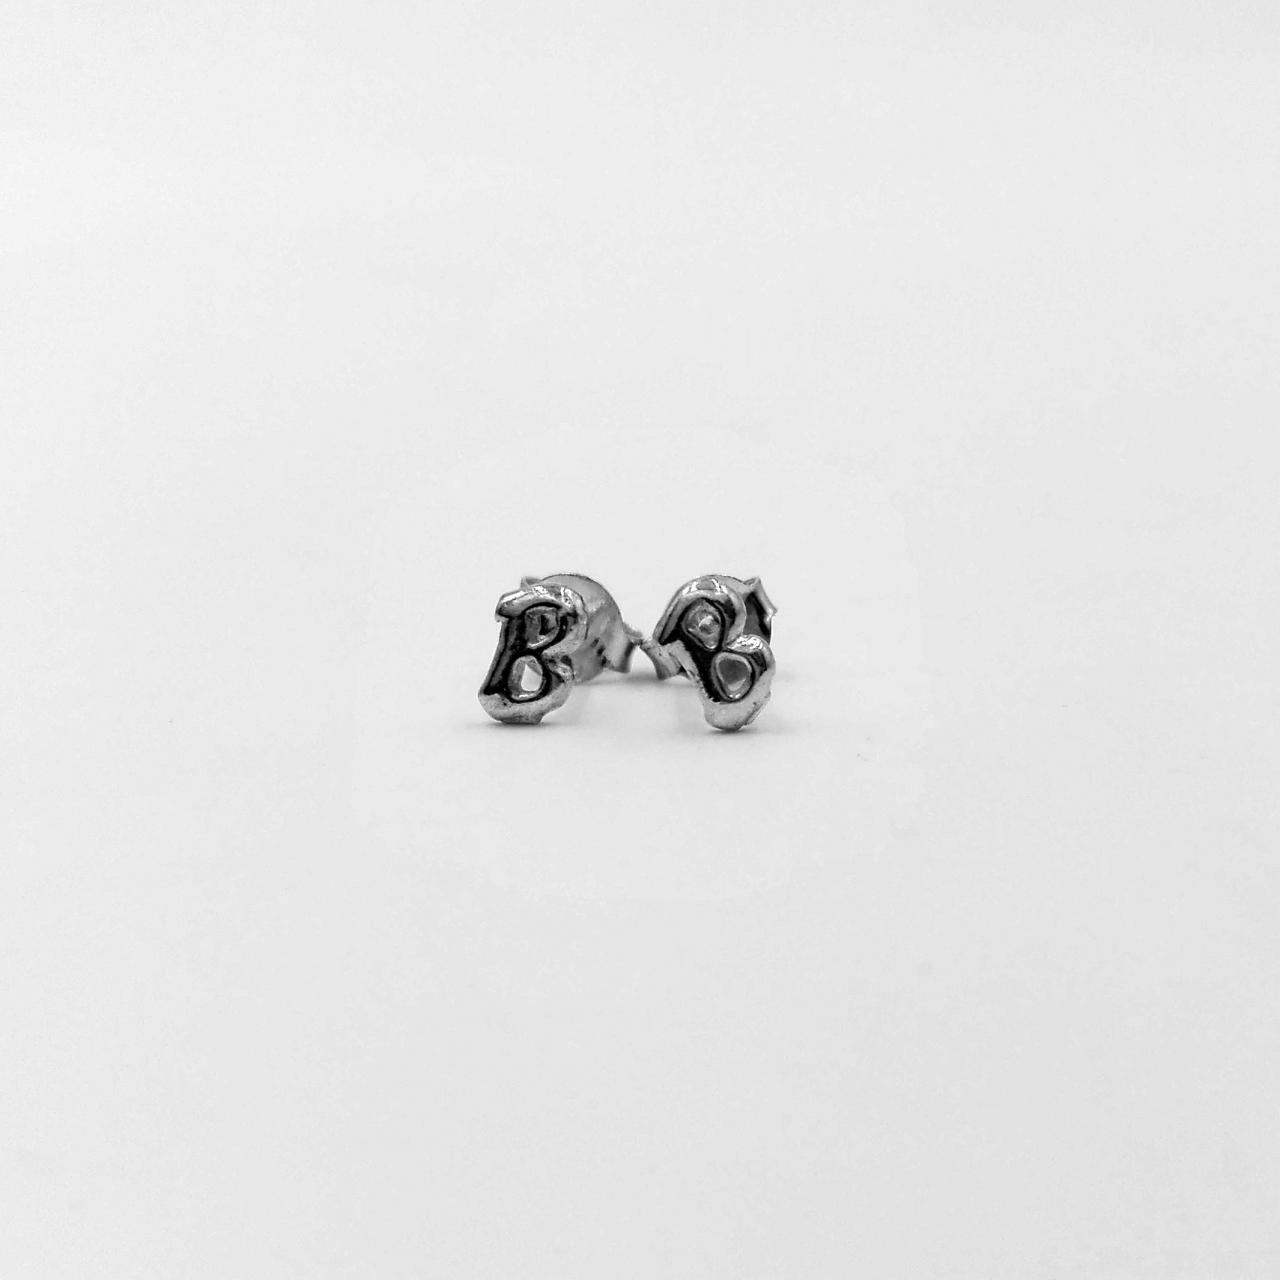 Initial Stud Earrings Made From Sterling Silver For Alphabet B In Tiny Size And Simple Design Suit For Everyday Wear